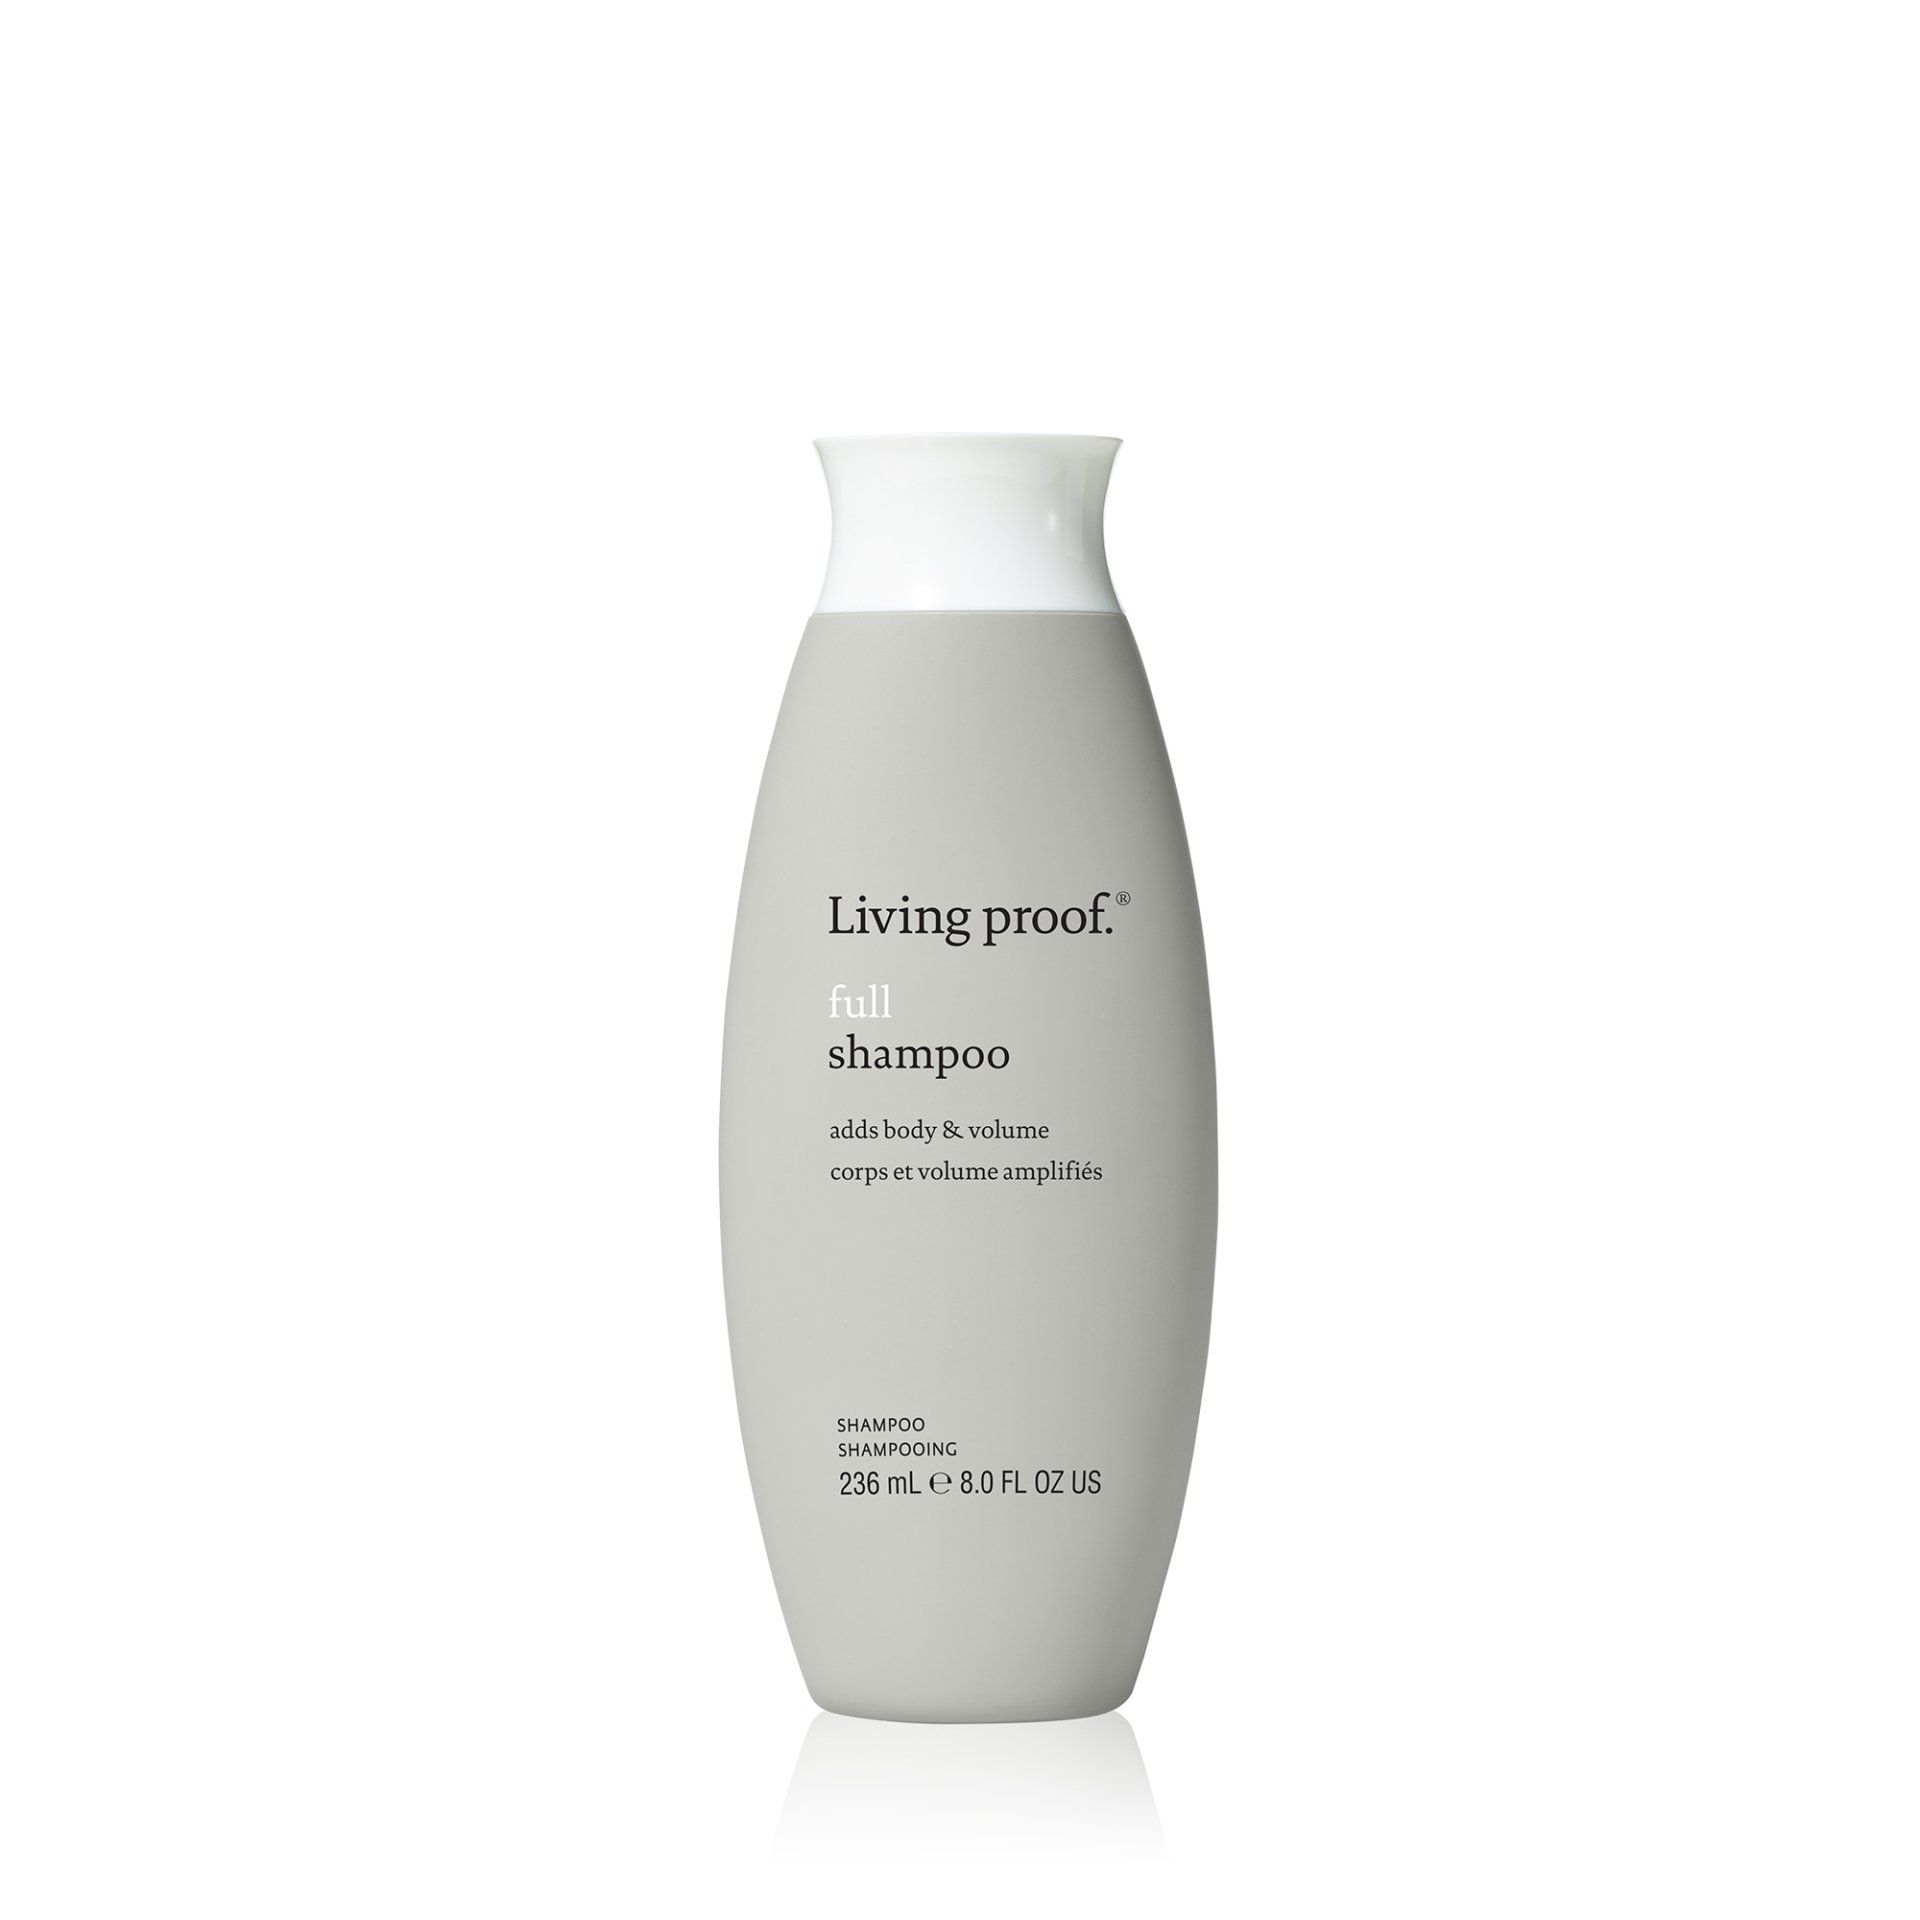 Living Proof products